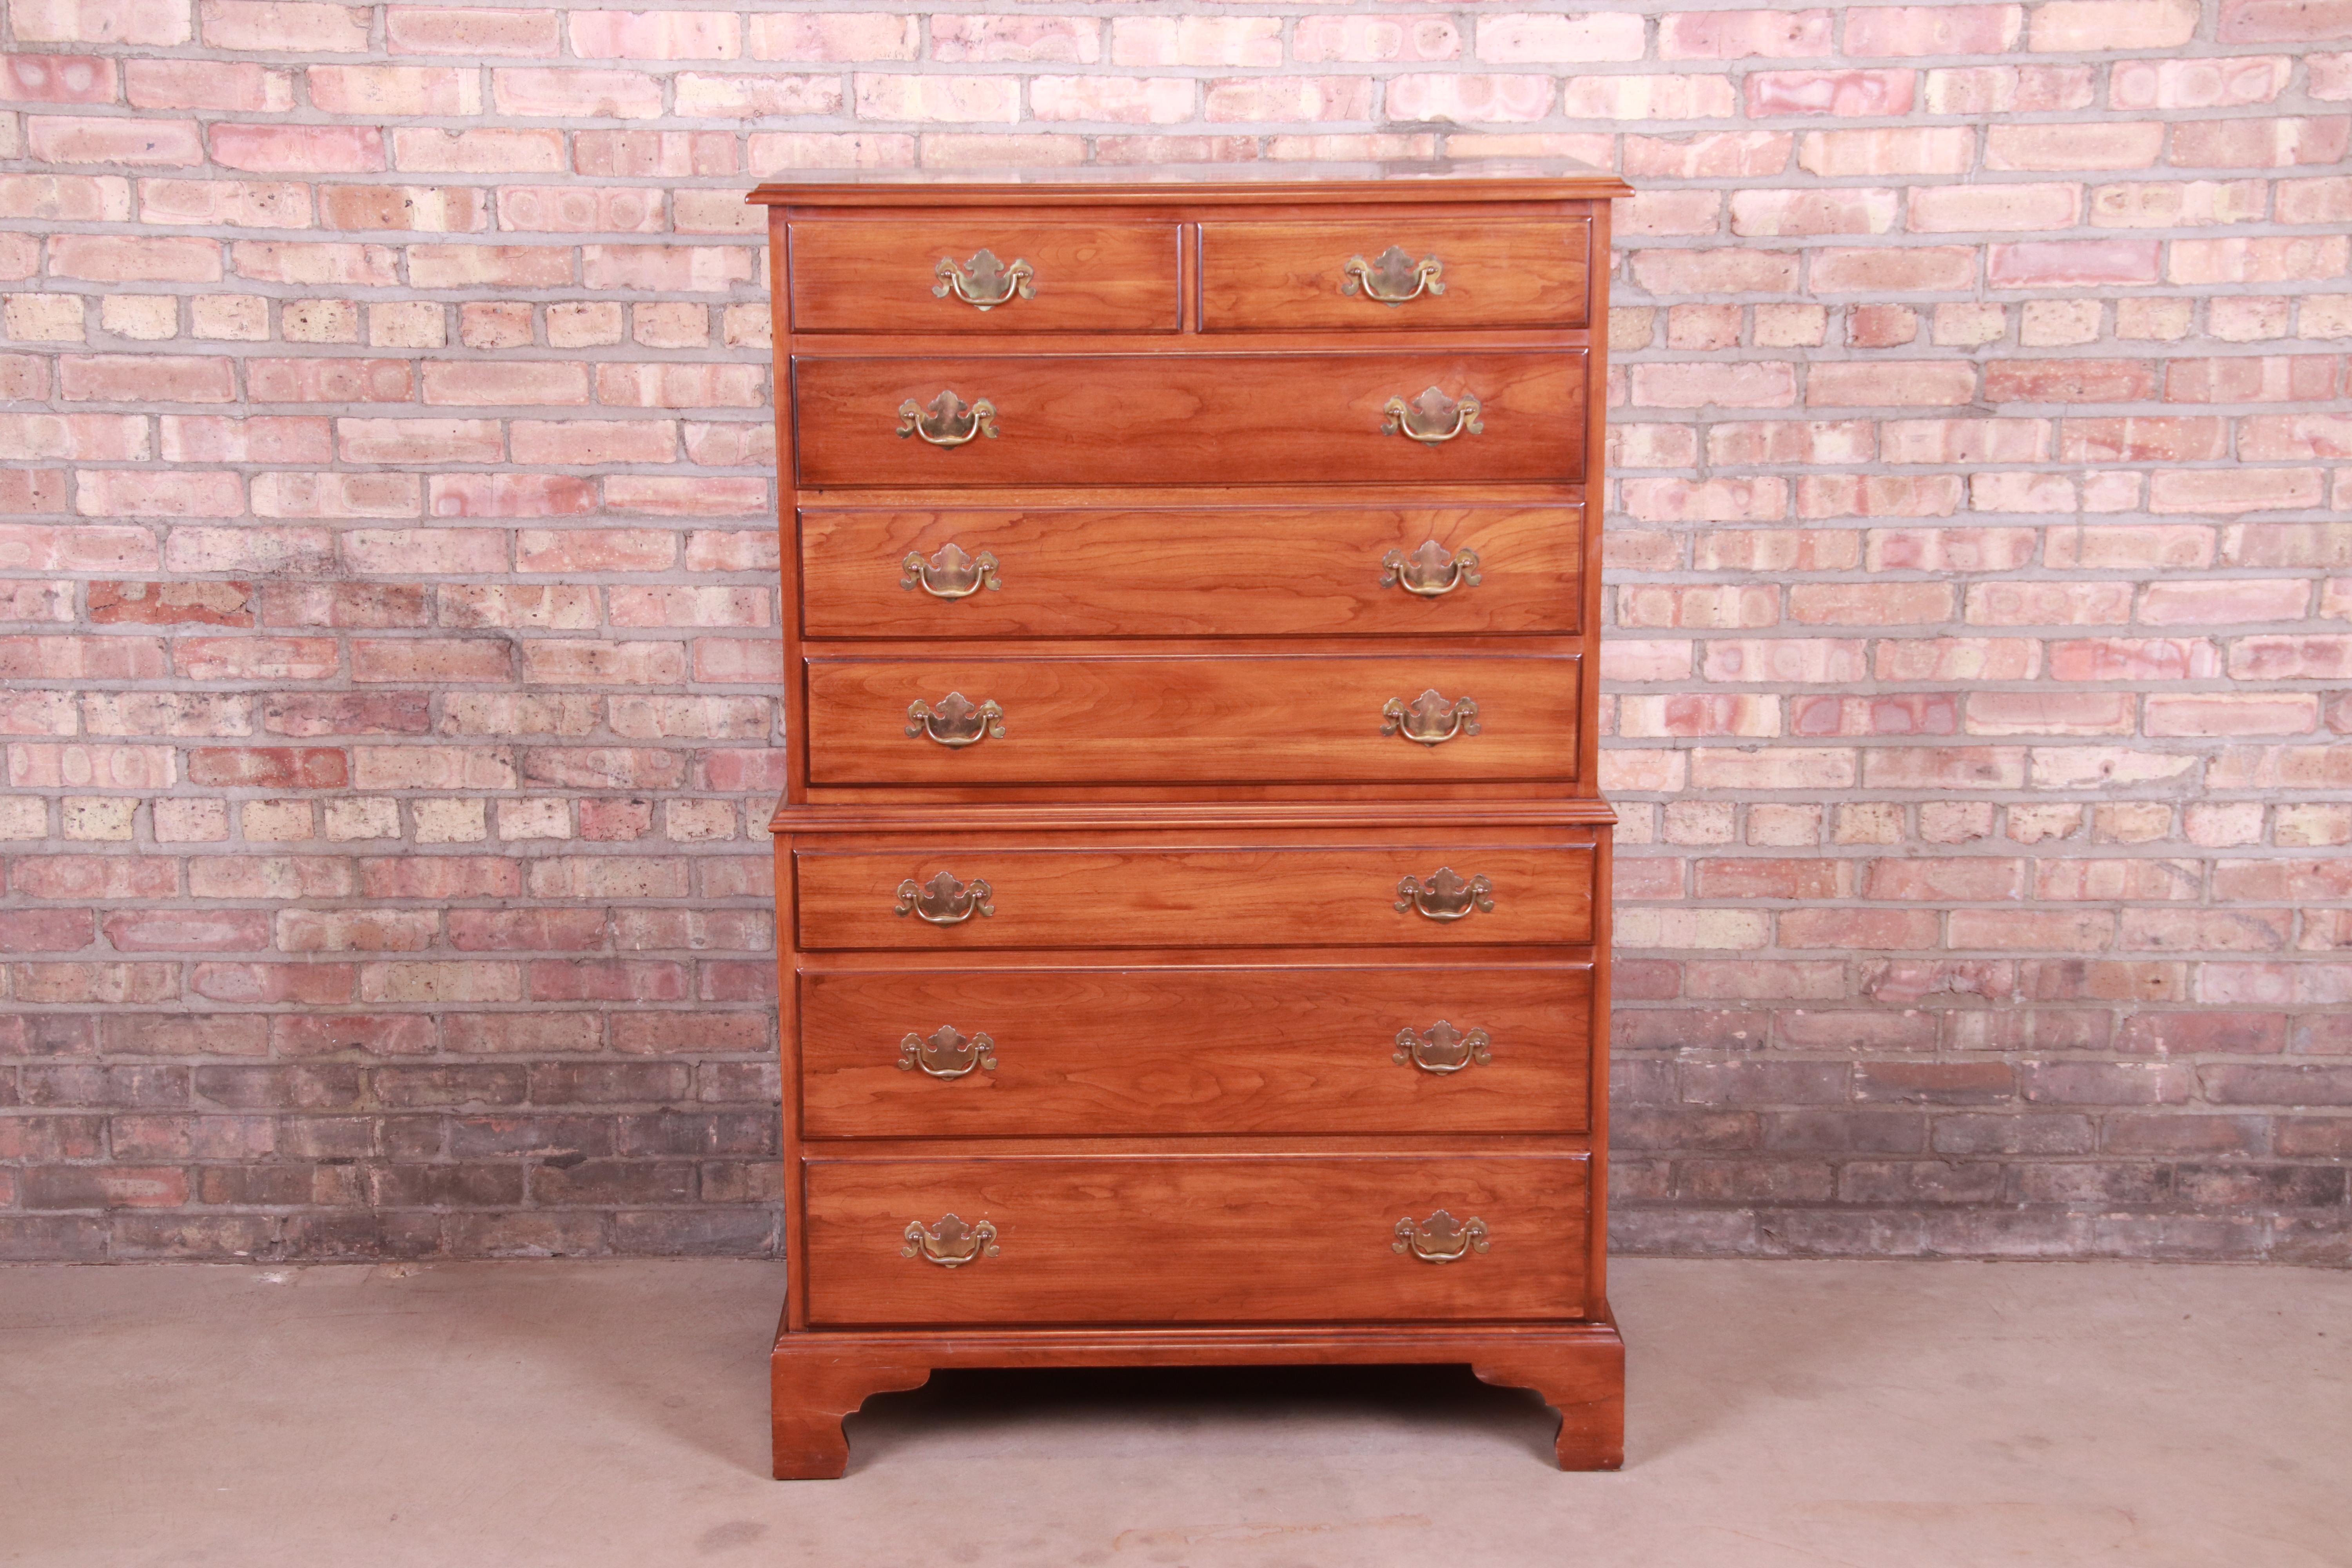 A gorgeous American Colonial or Chippendale style eight-drawer highboy chest of drawers

By Henkel Harris

USA, late 20th century

Solid wild black cherry wood, with original brass hardware.

Measures: 36.25